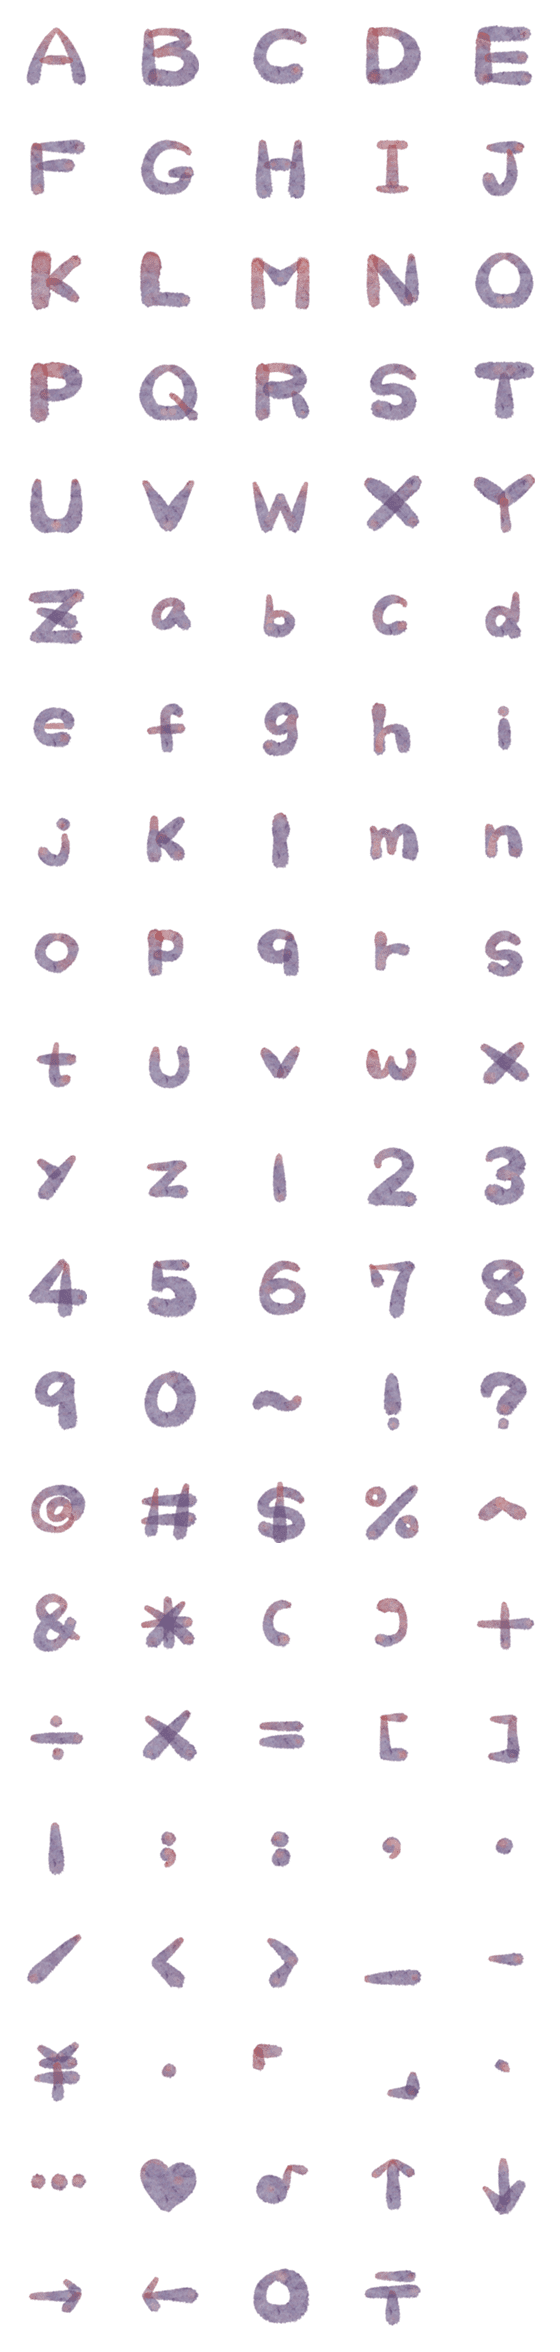 [LINE絵文字]Water letter number symbols4の画像一覧